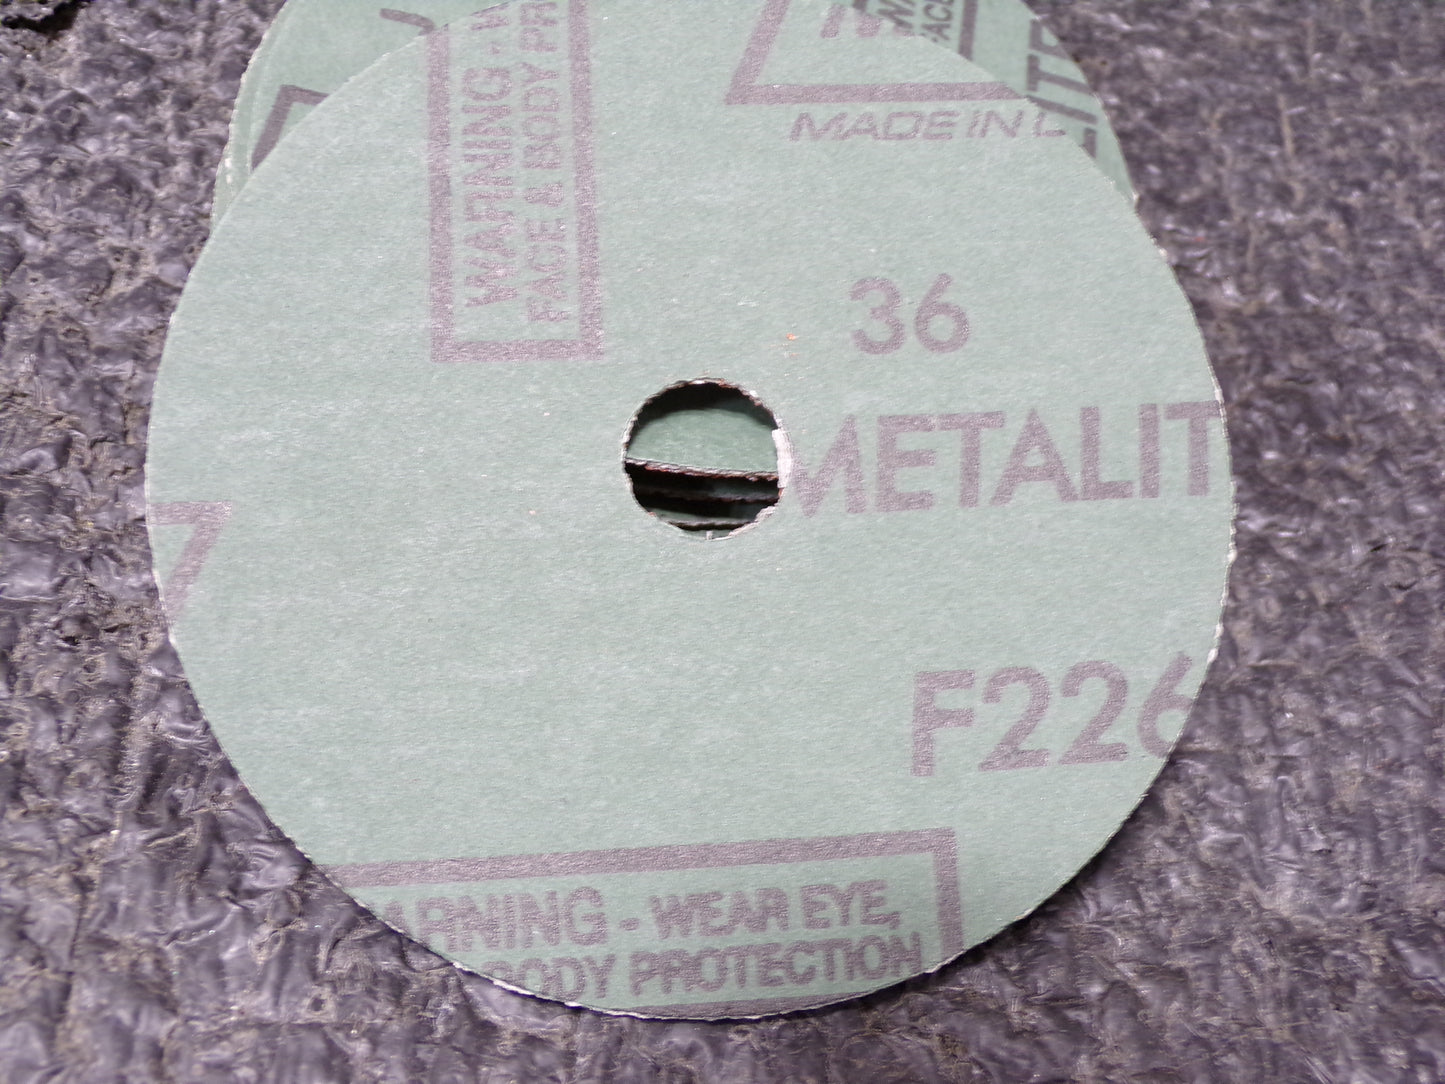 NORTON Aluminum Oxide, Fiber Disc, Coated, 4 in Dia., 36 Grit, 5/8 in Mounting Hole Size, PK 10 (CR00171-BT25)